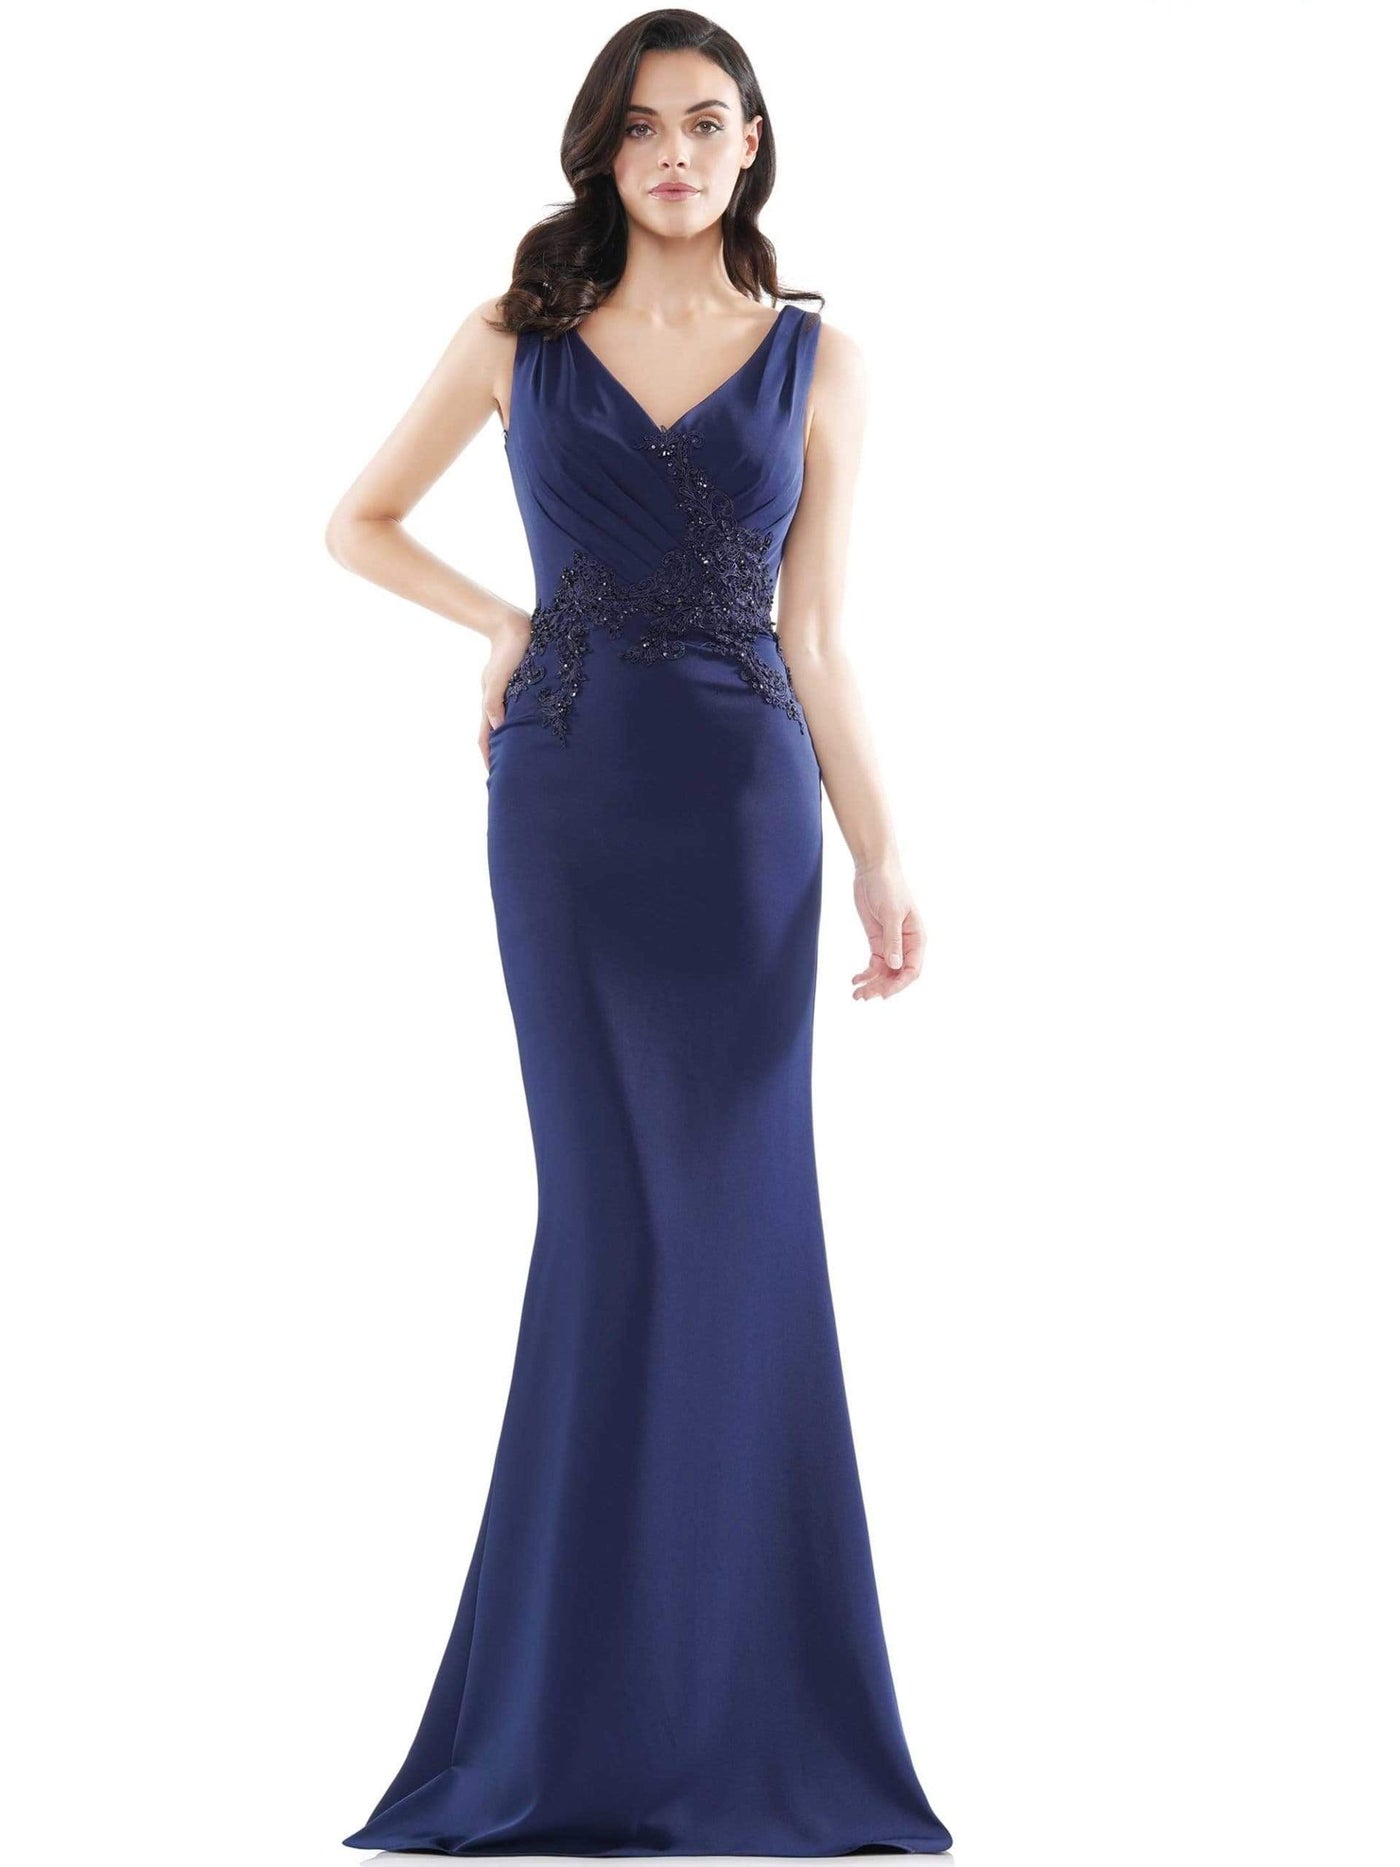 Marsoni by Colors - MV1054 Embroidered V-neck Trumpet Dress Mother of the Bride Dresses 4 / Navy